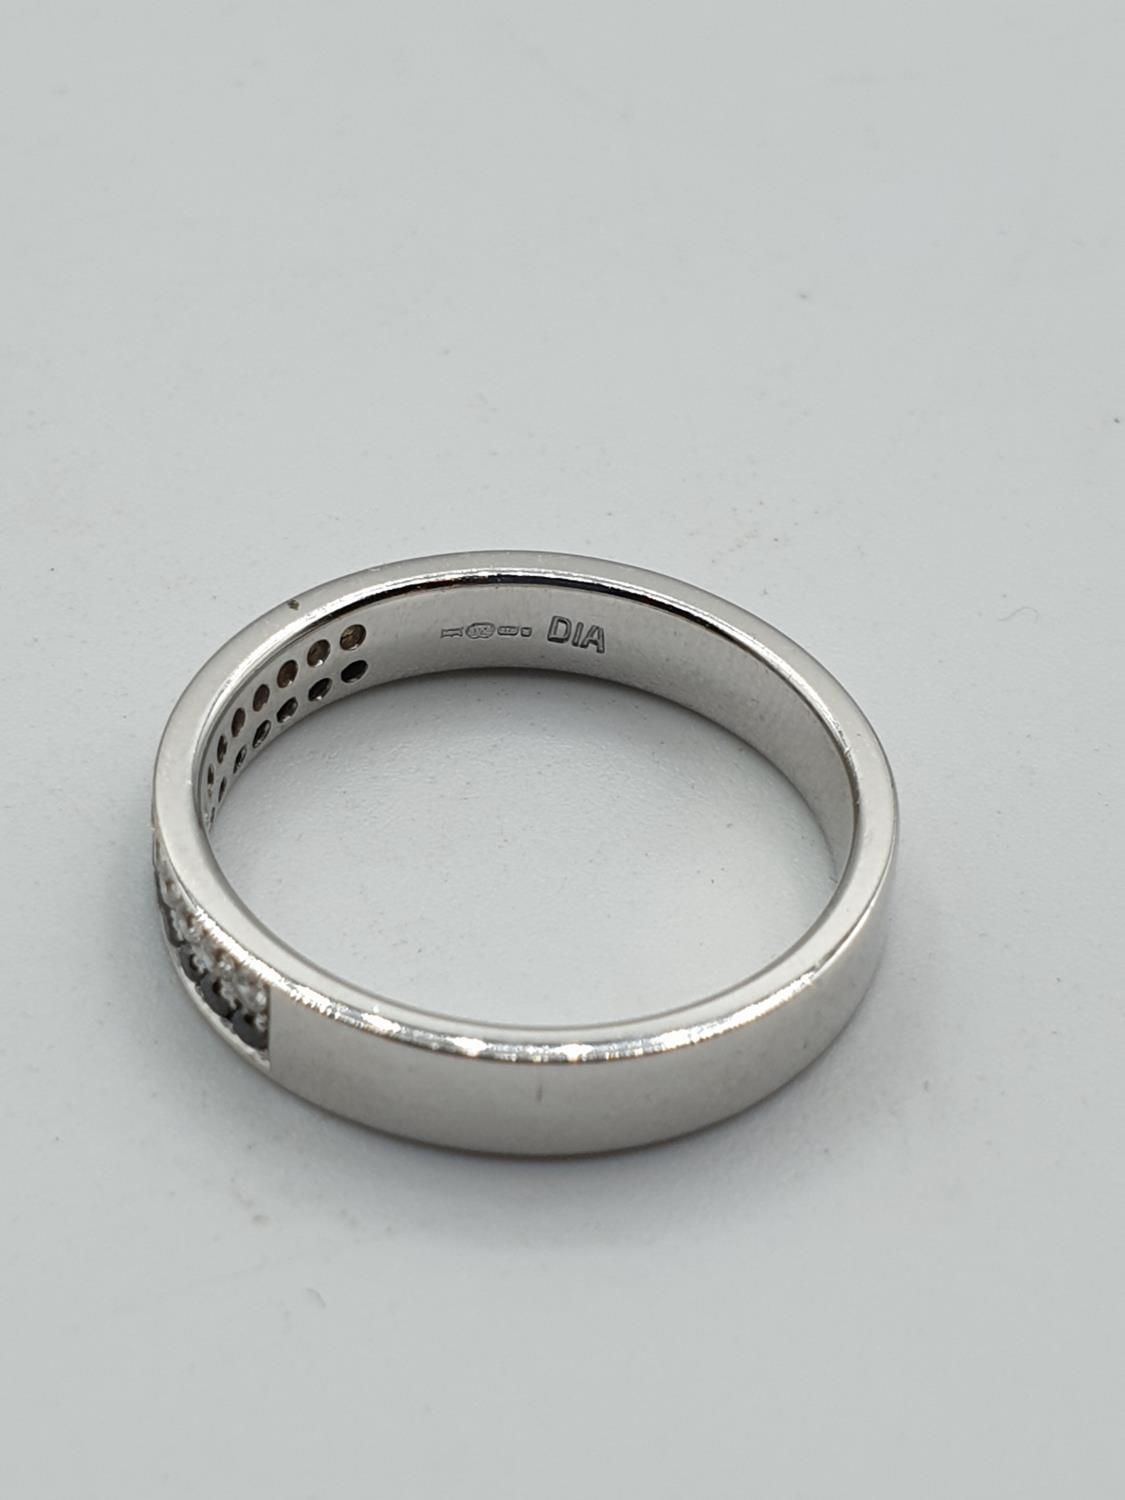 9ct white gold with 2 rows of white and black diamond ring, weight 3.1g. Size N - Image 4 of 4